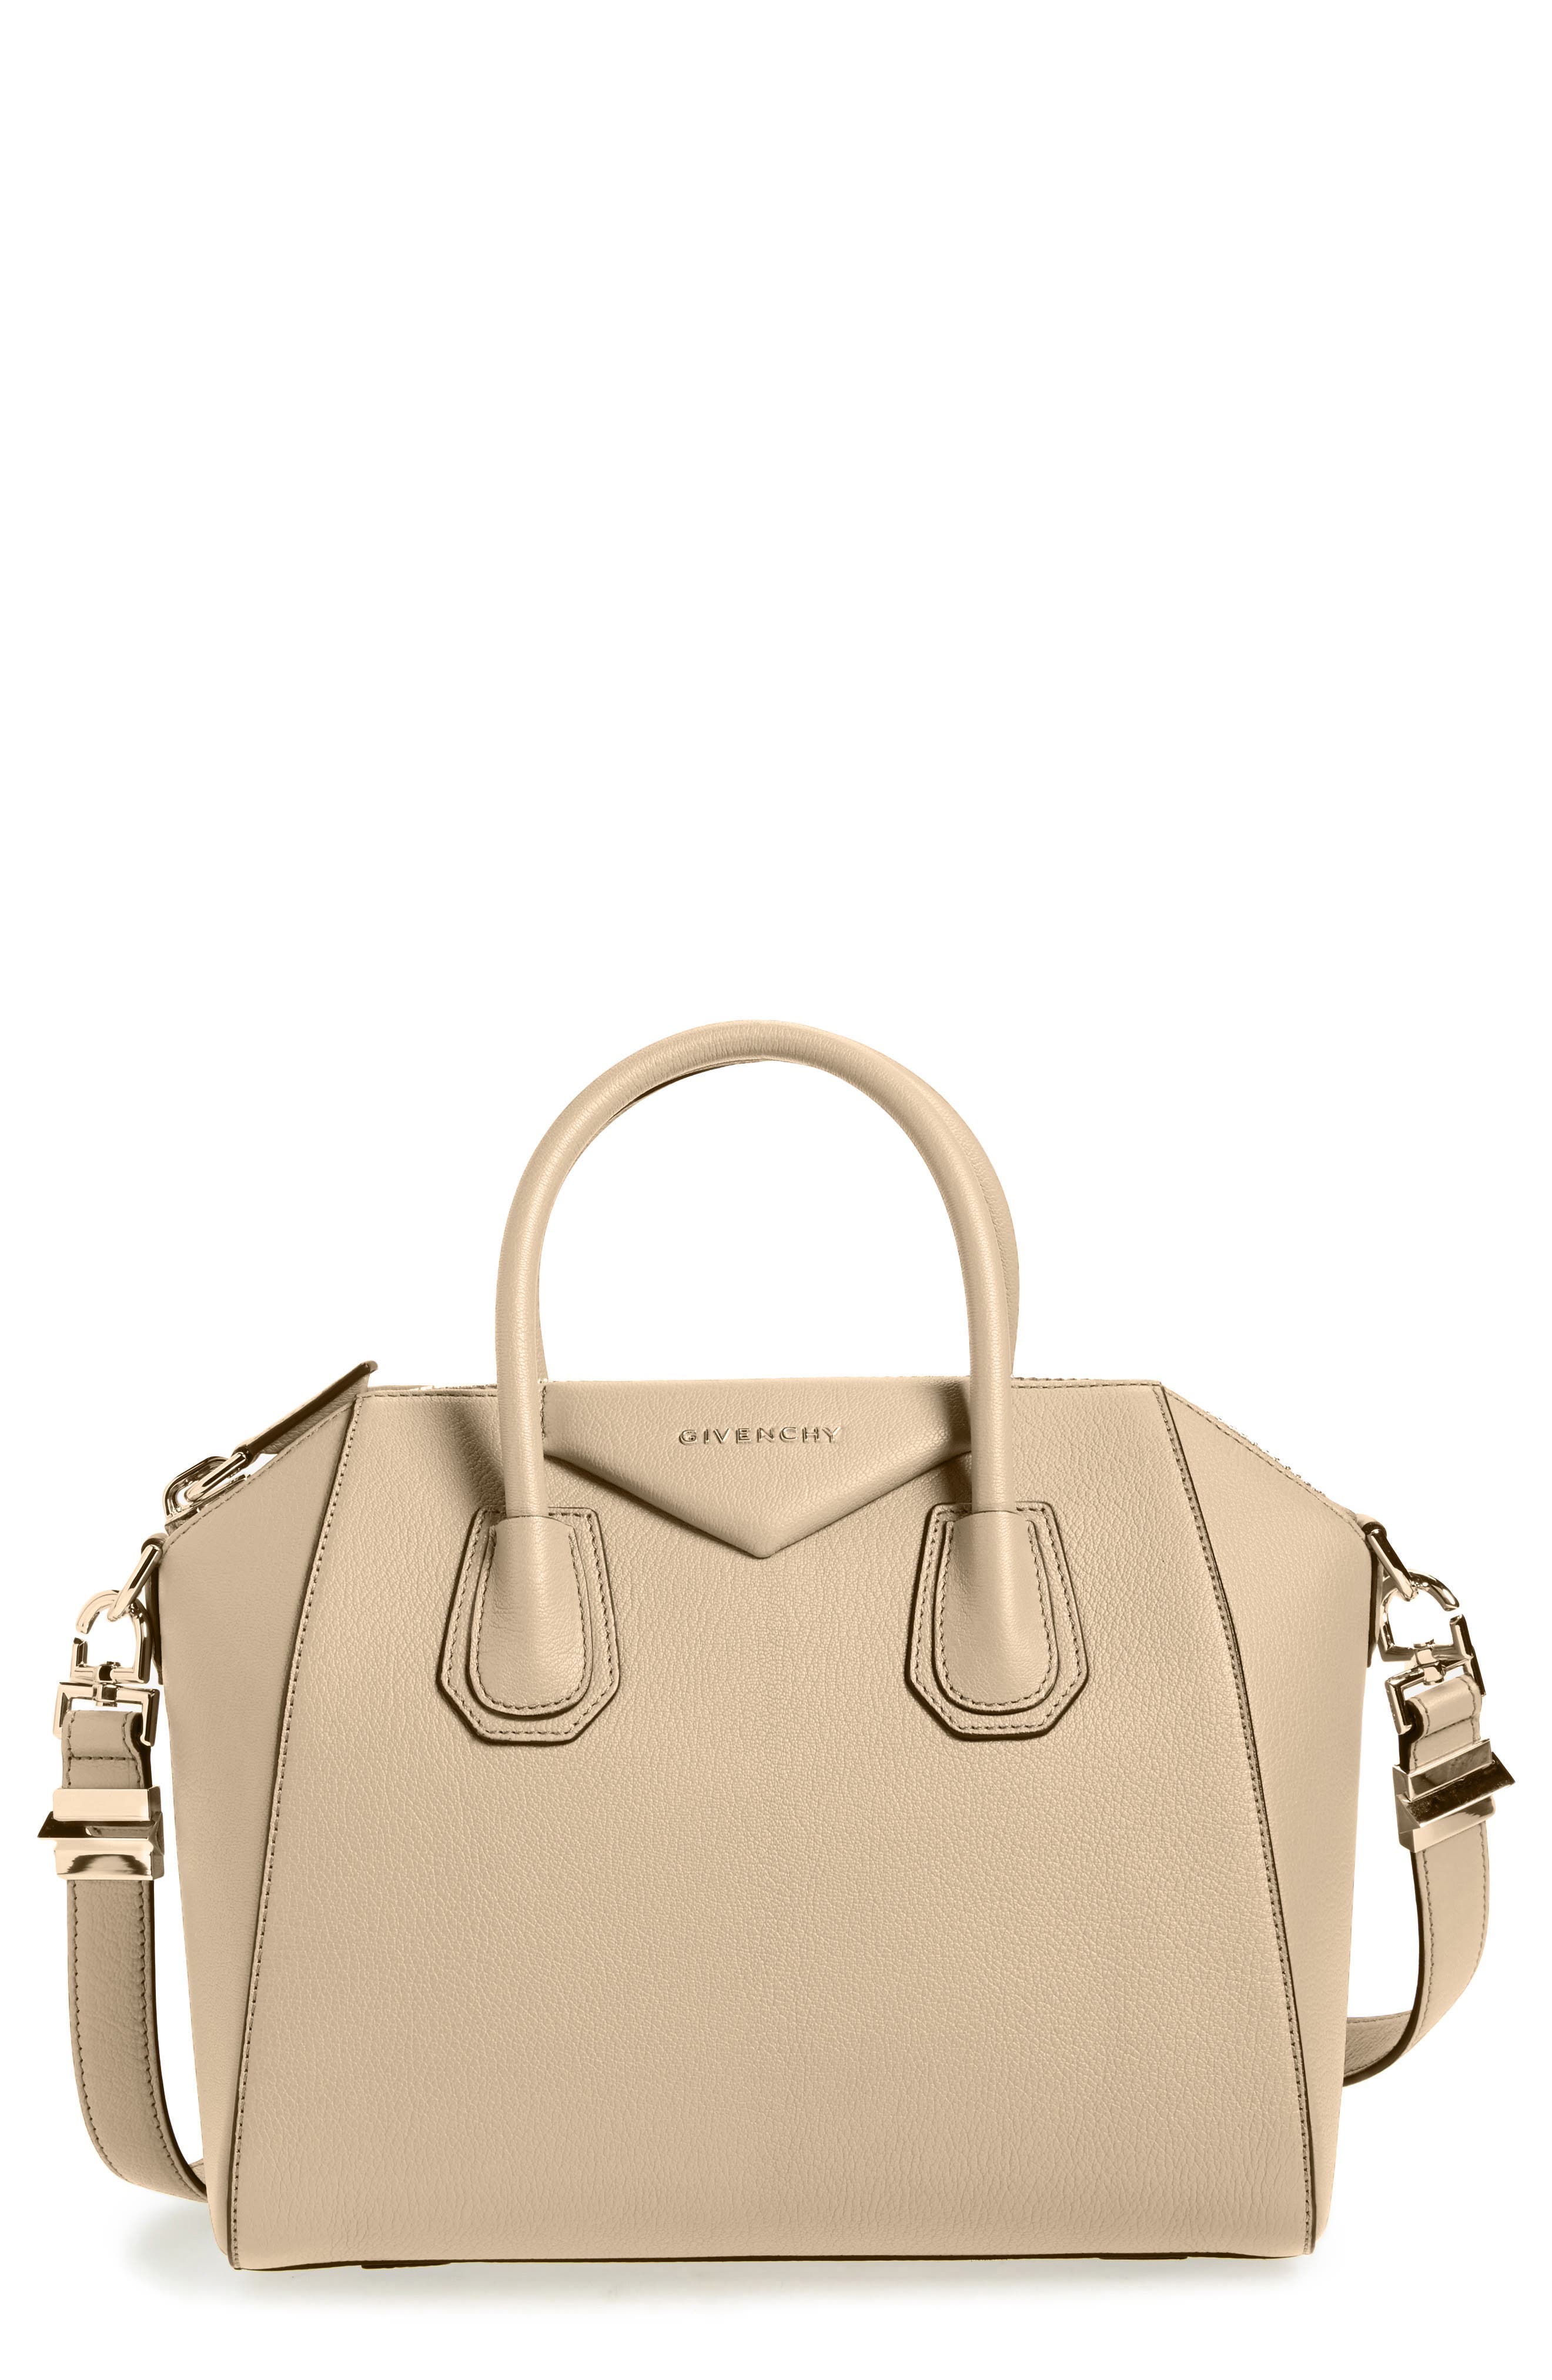 givenchy purse nordstrom